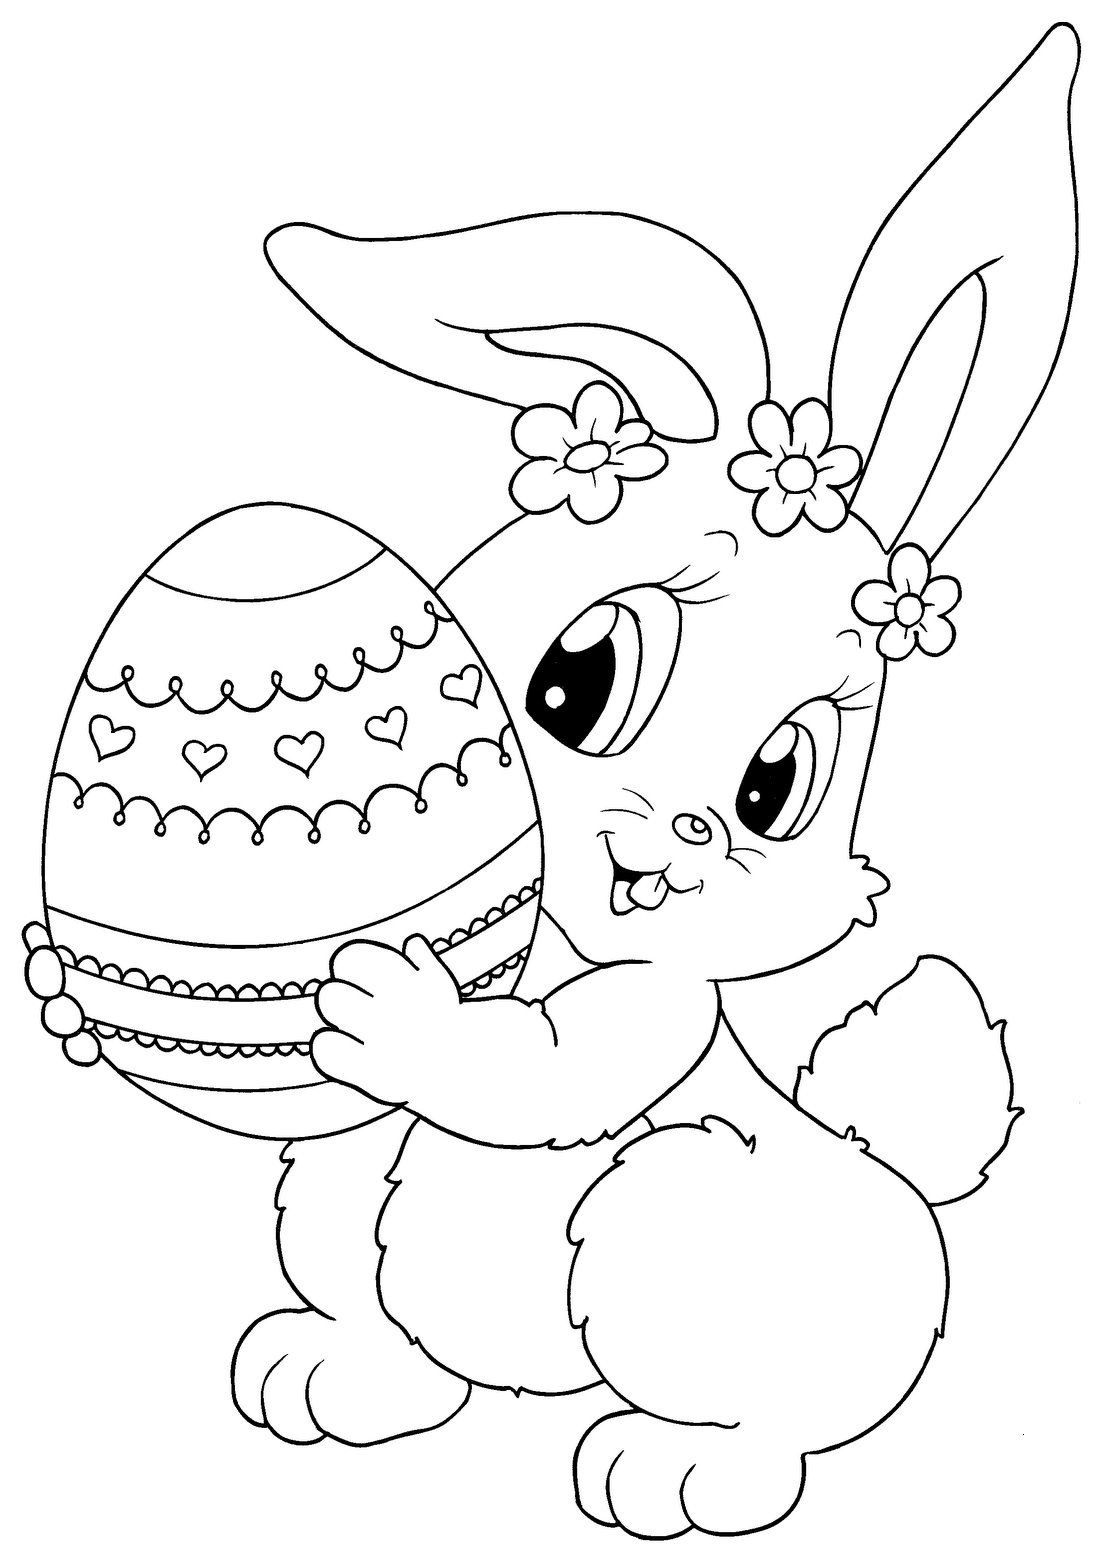 Top 15 Free Printable Easter Bunny Coloring Pages Online | Easter - Free Easter Color Pages Printable